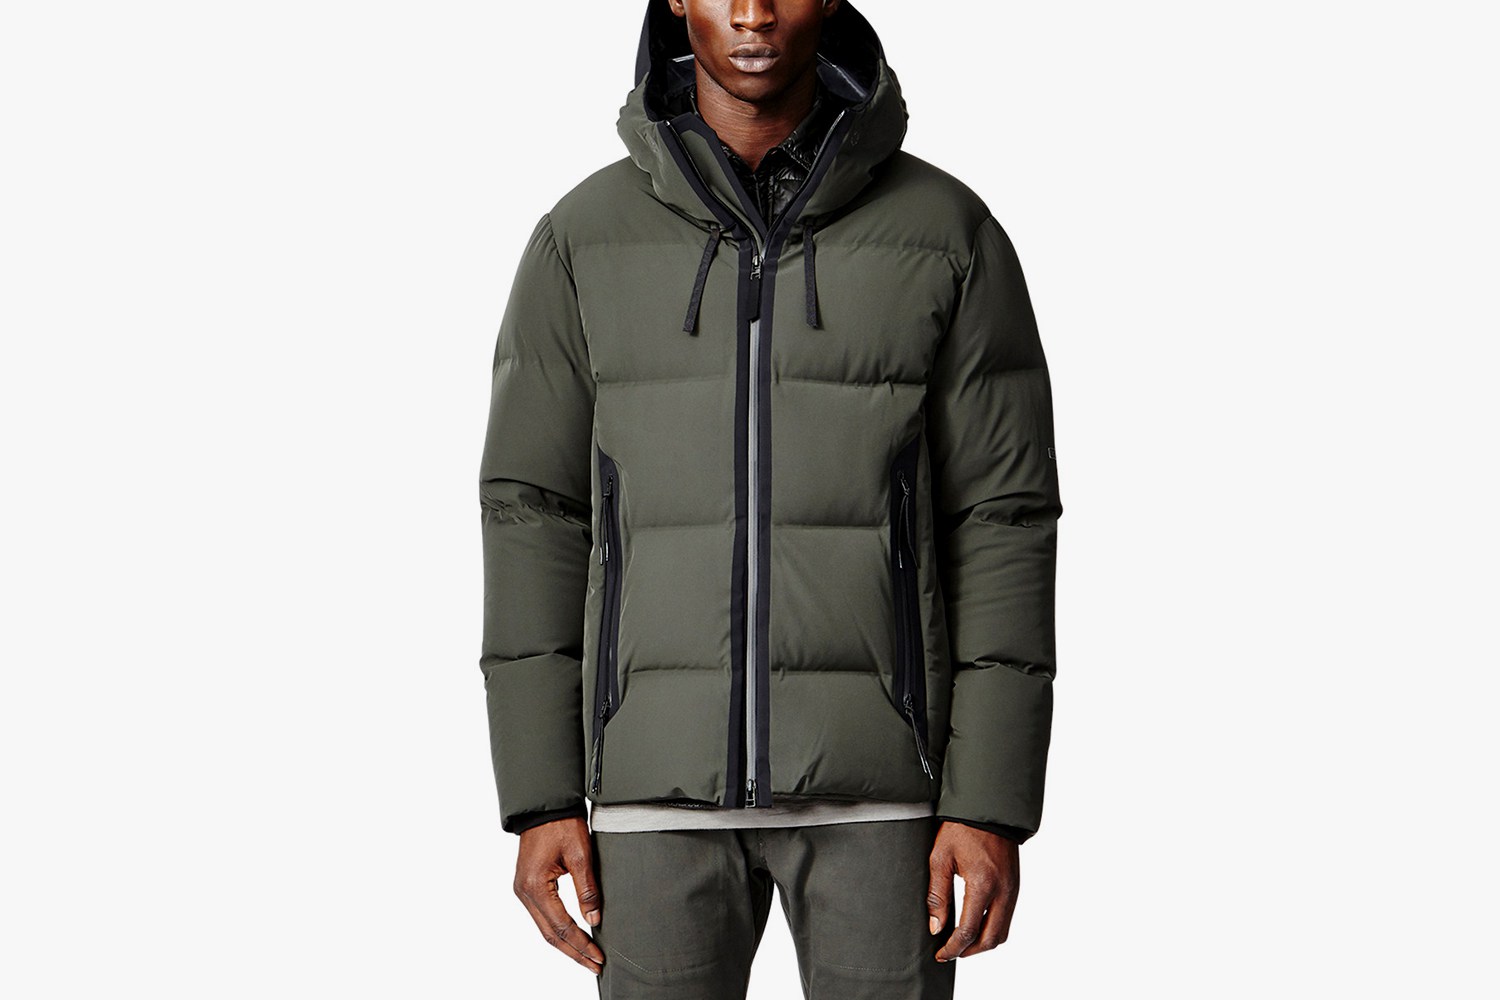 10 Stylish Cold Weather Jackets Designed For Winter Survival